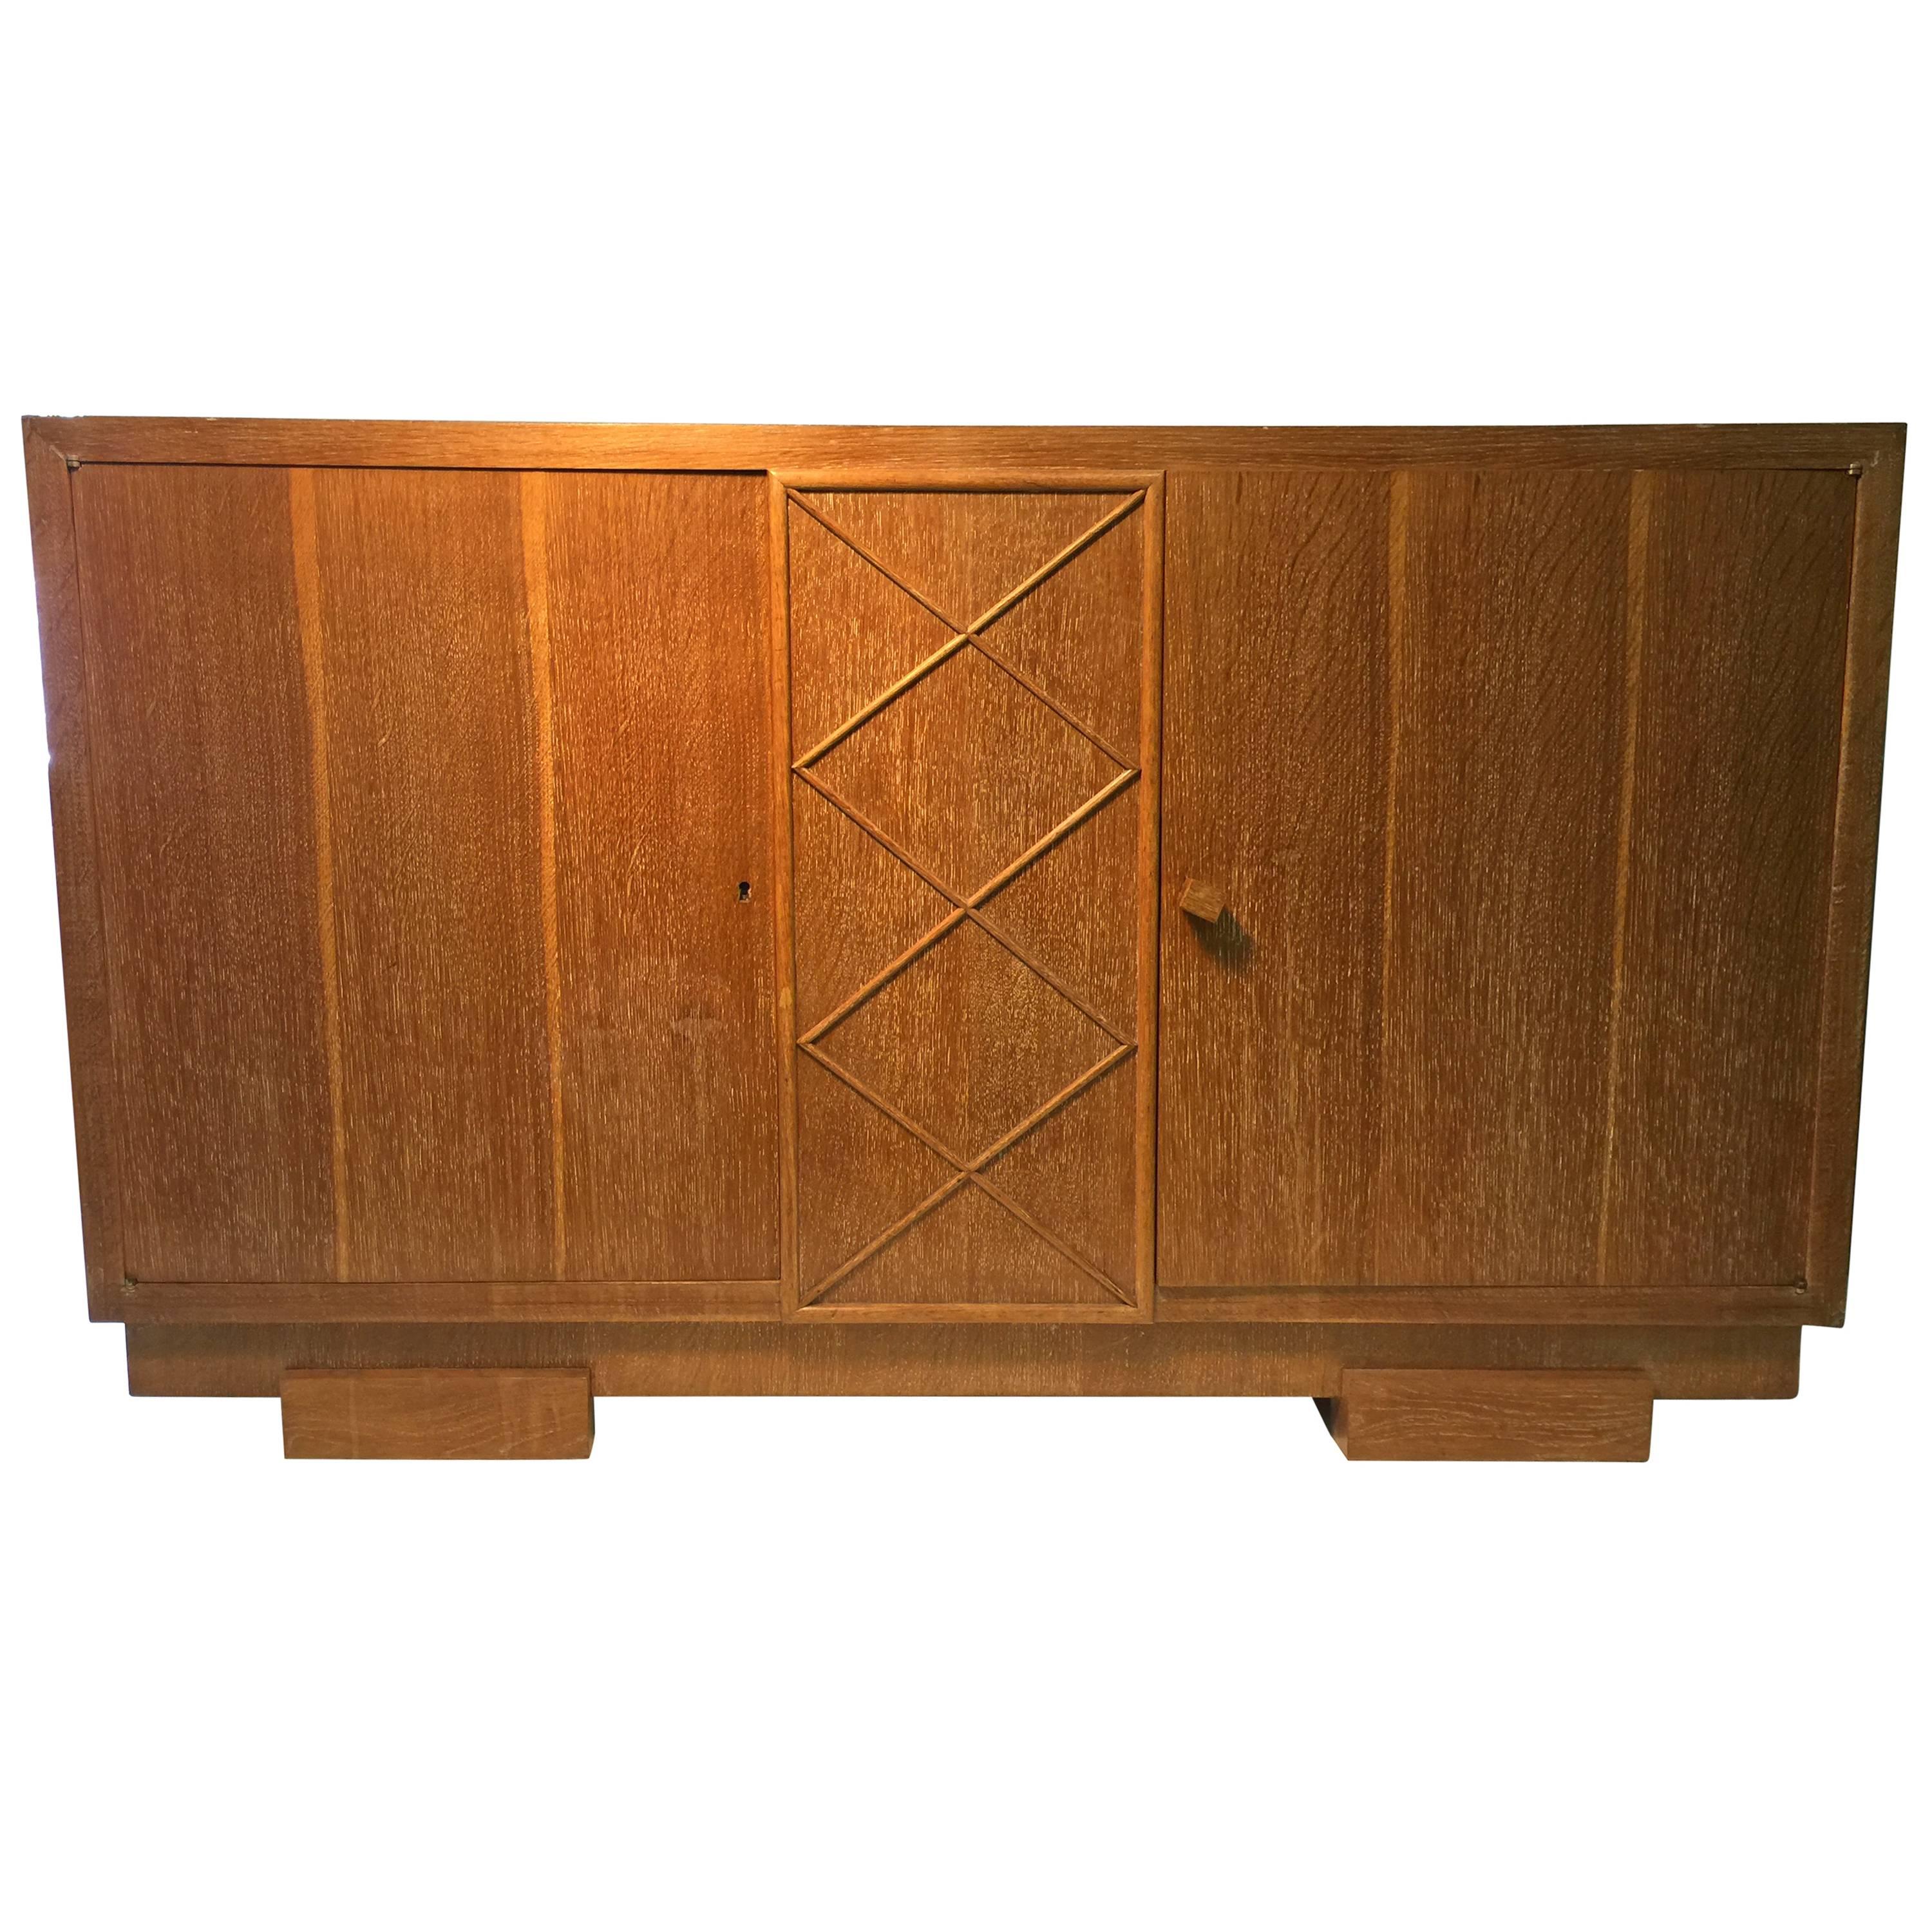 Unusual Sideboard or Cabinet in Cerused Oak Attributed to Jacques Adnet For Sale